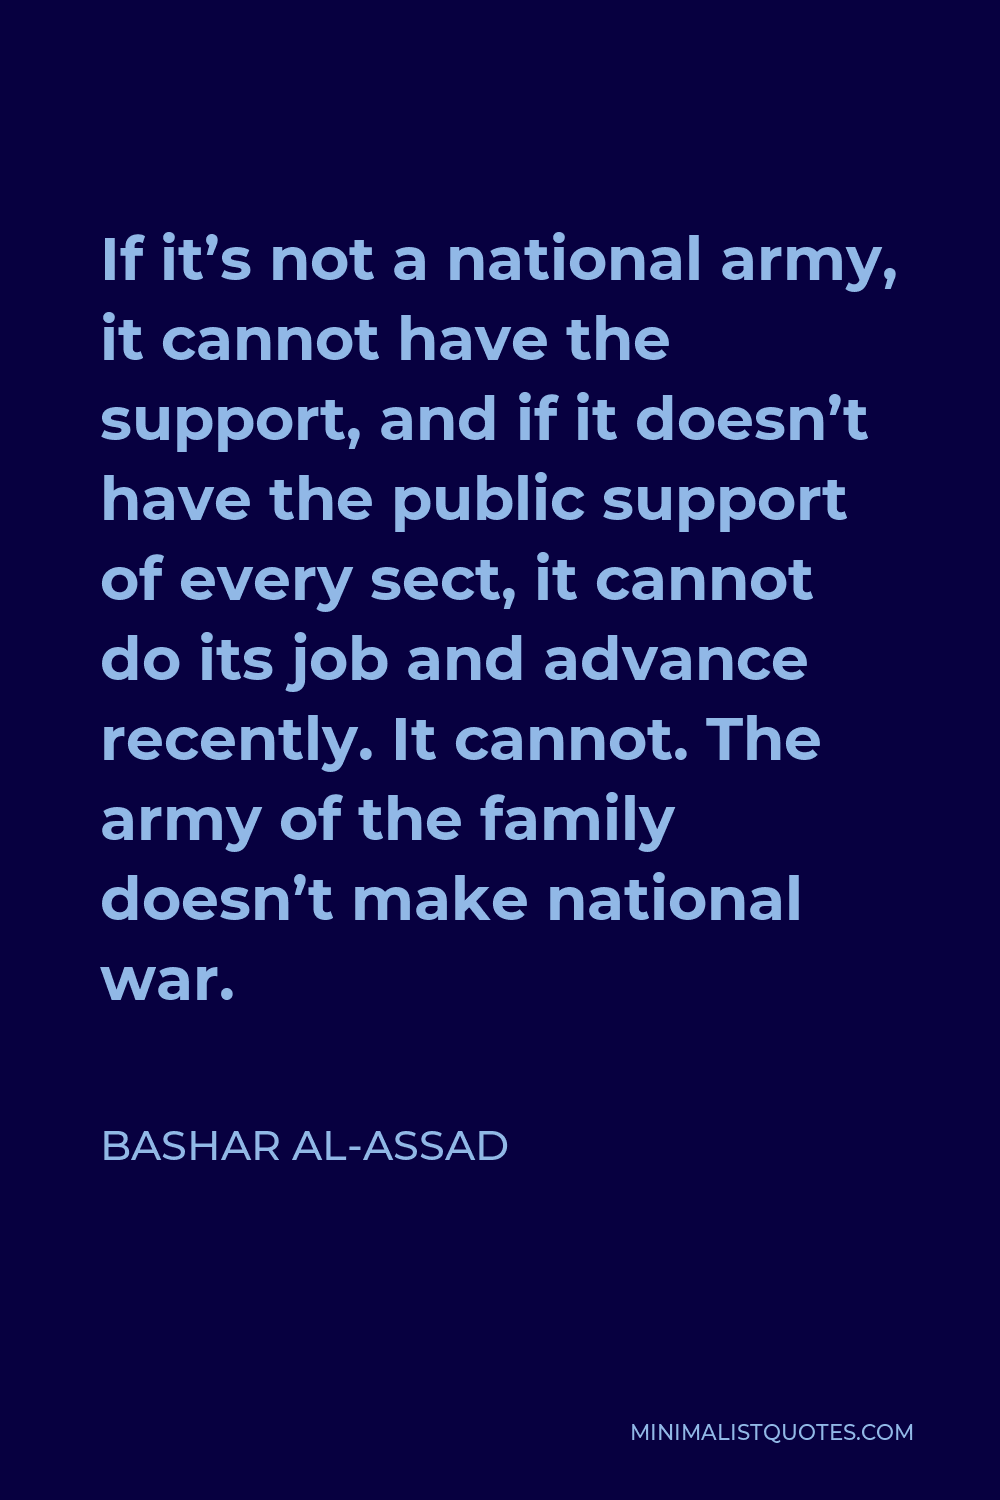 Bashar al-Assad Quote - If it’s not a national army, it cannot have the support, and if it doesn’t have the public support of every sect, it cannot do its job and advance recently. It cannot. The army of the family doesn’t make national war.